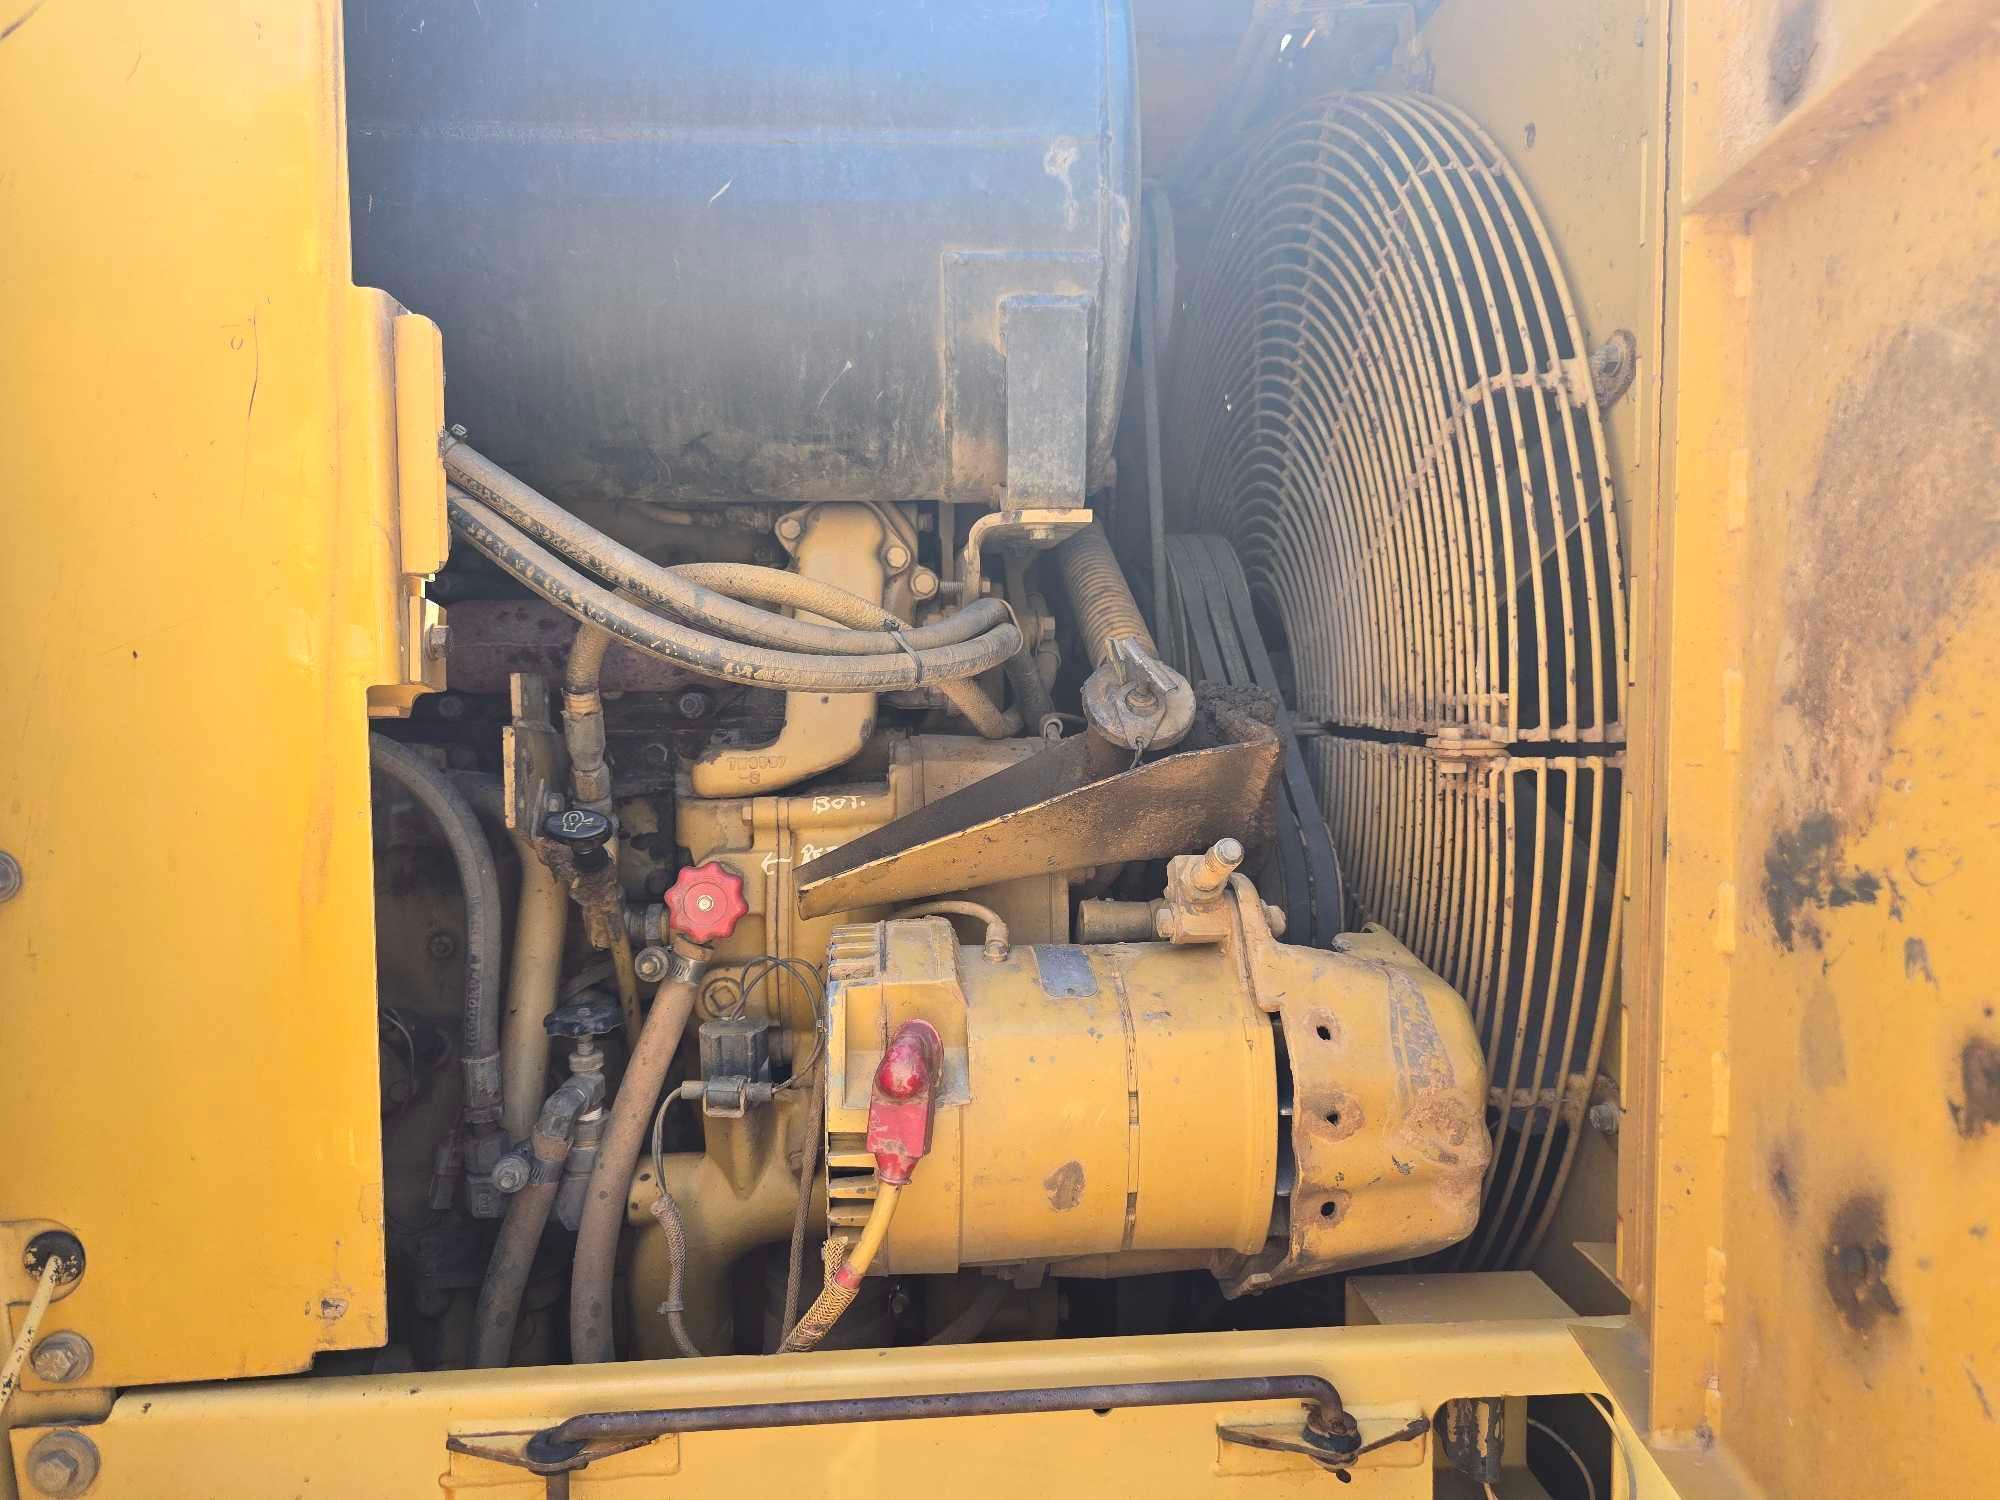 CAT 621F MOTOR SCRAPER SN:4SK00601 powered by Cat 3406 diesel engine, equipped with EROPS, air,